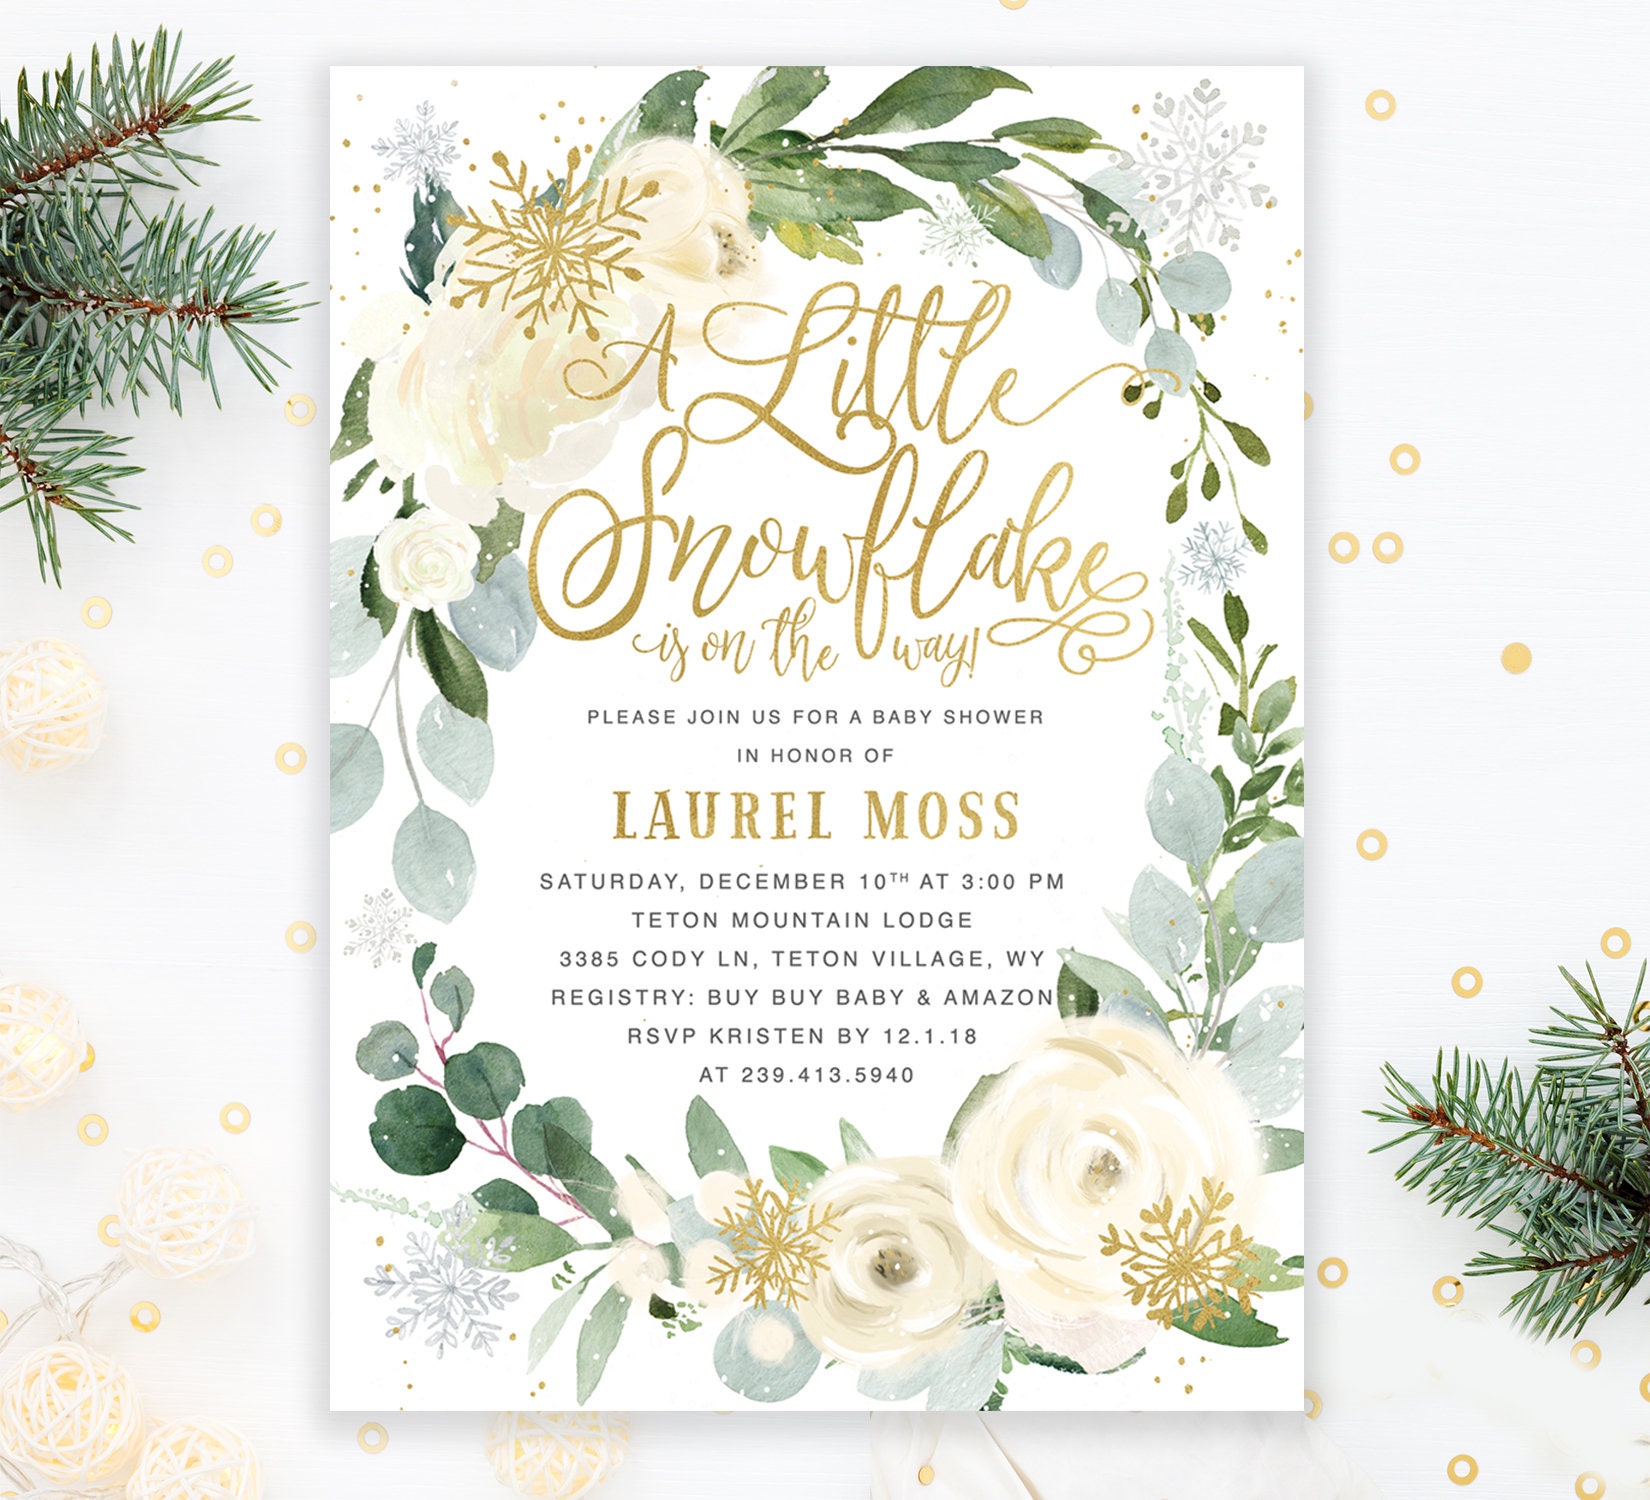 Snowflake Baby Shower Invitation, Winter Invite, A Little White Florals, Snow & Greenery - Holiday 45